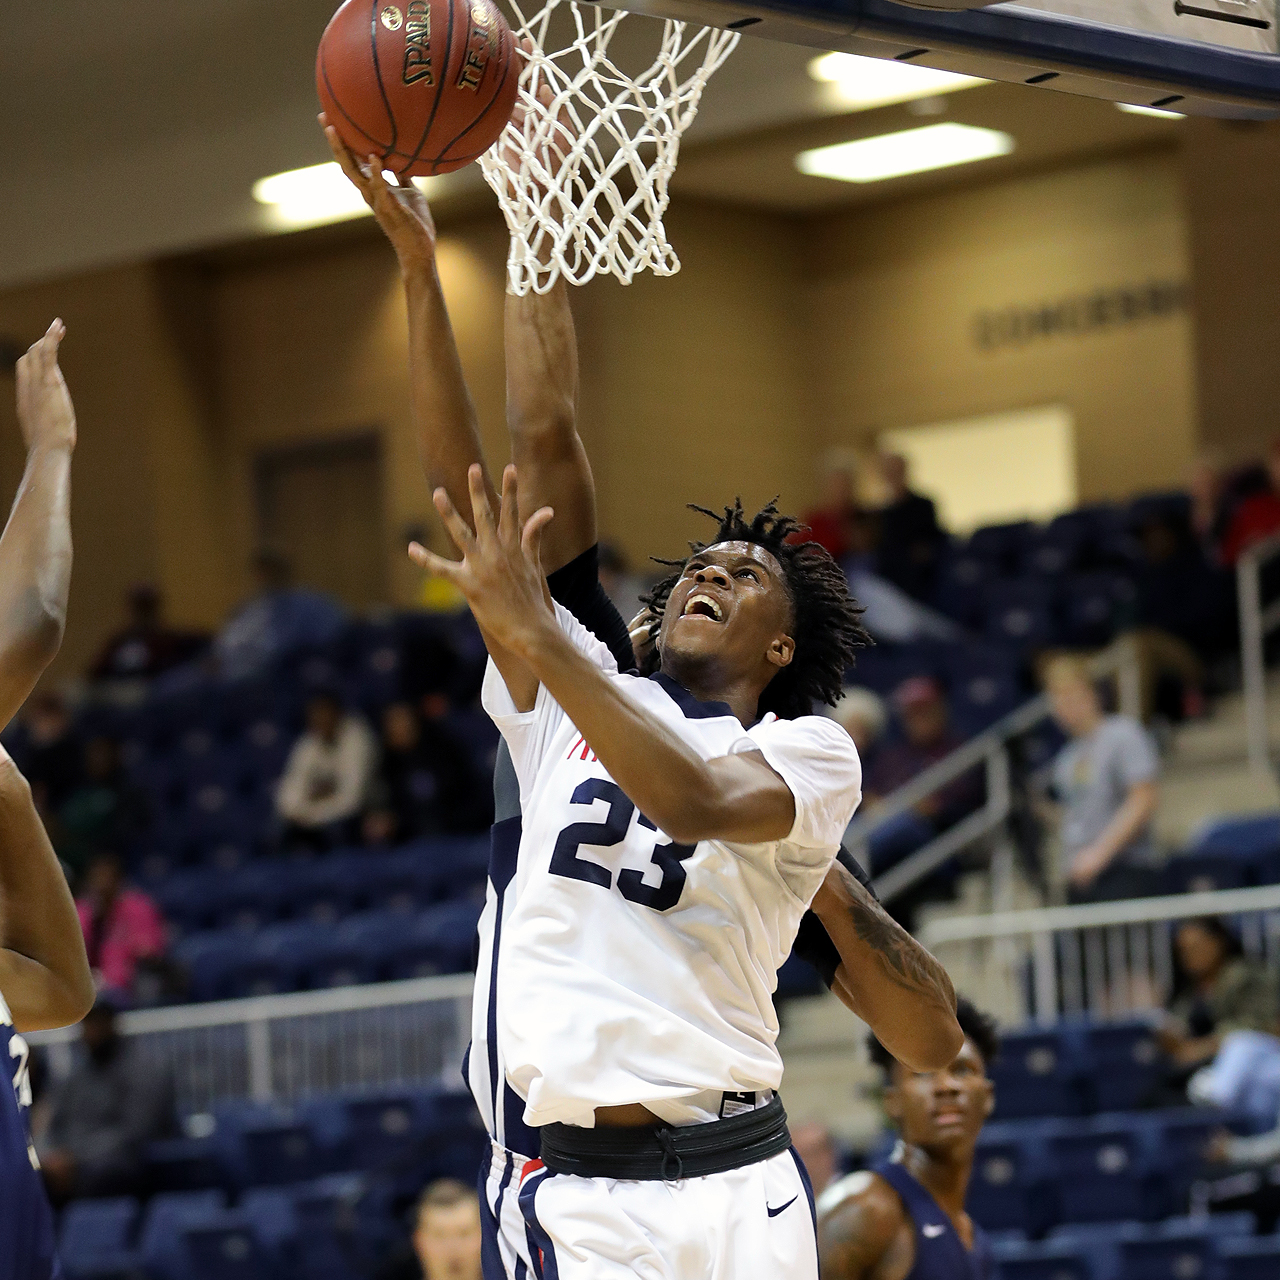 Indians battle to 70-62 win over Lawson State